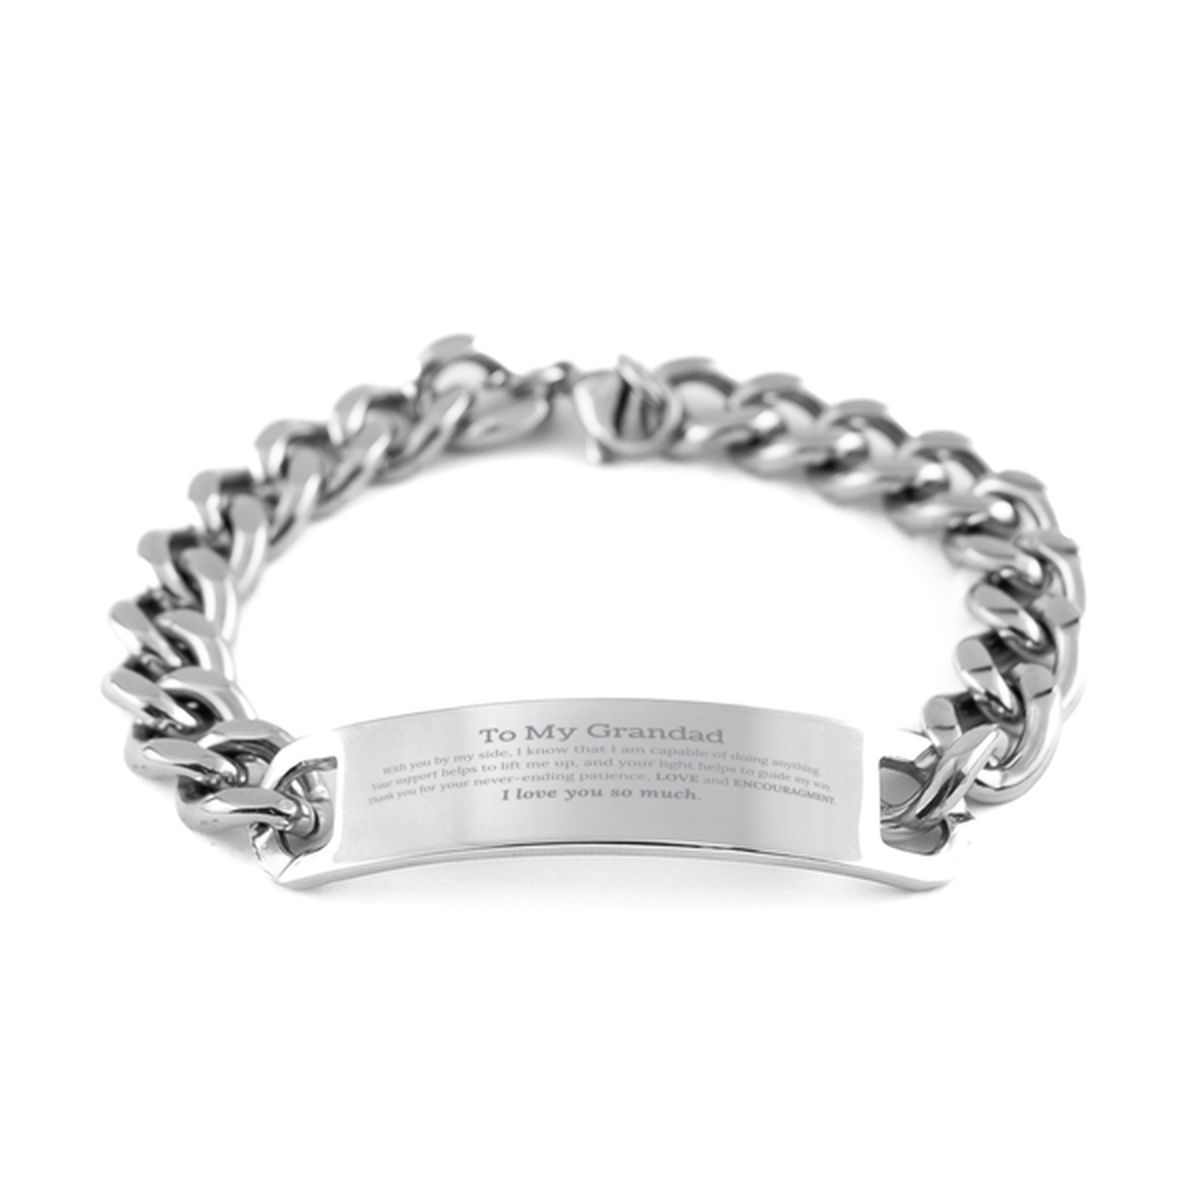 Appreciation Grandad Cuban Chain Stainless Steel Bracelet Gifts, To My Grandad Birthday Christmas Wedding Keepsake Gifts for Grandad With you by my side, I know that I am capable of doing anything. I love you so much